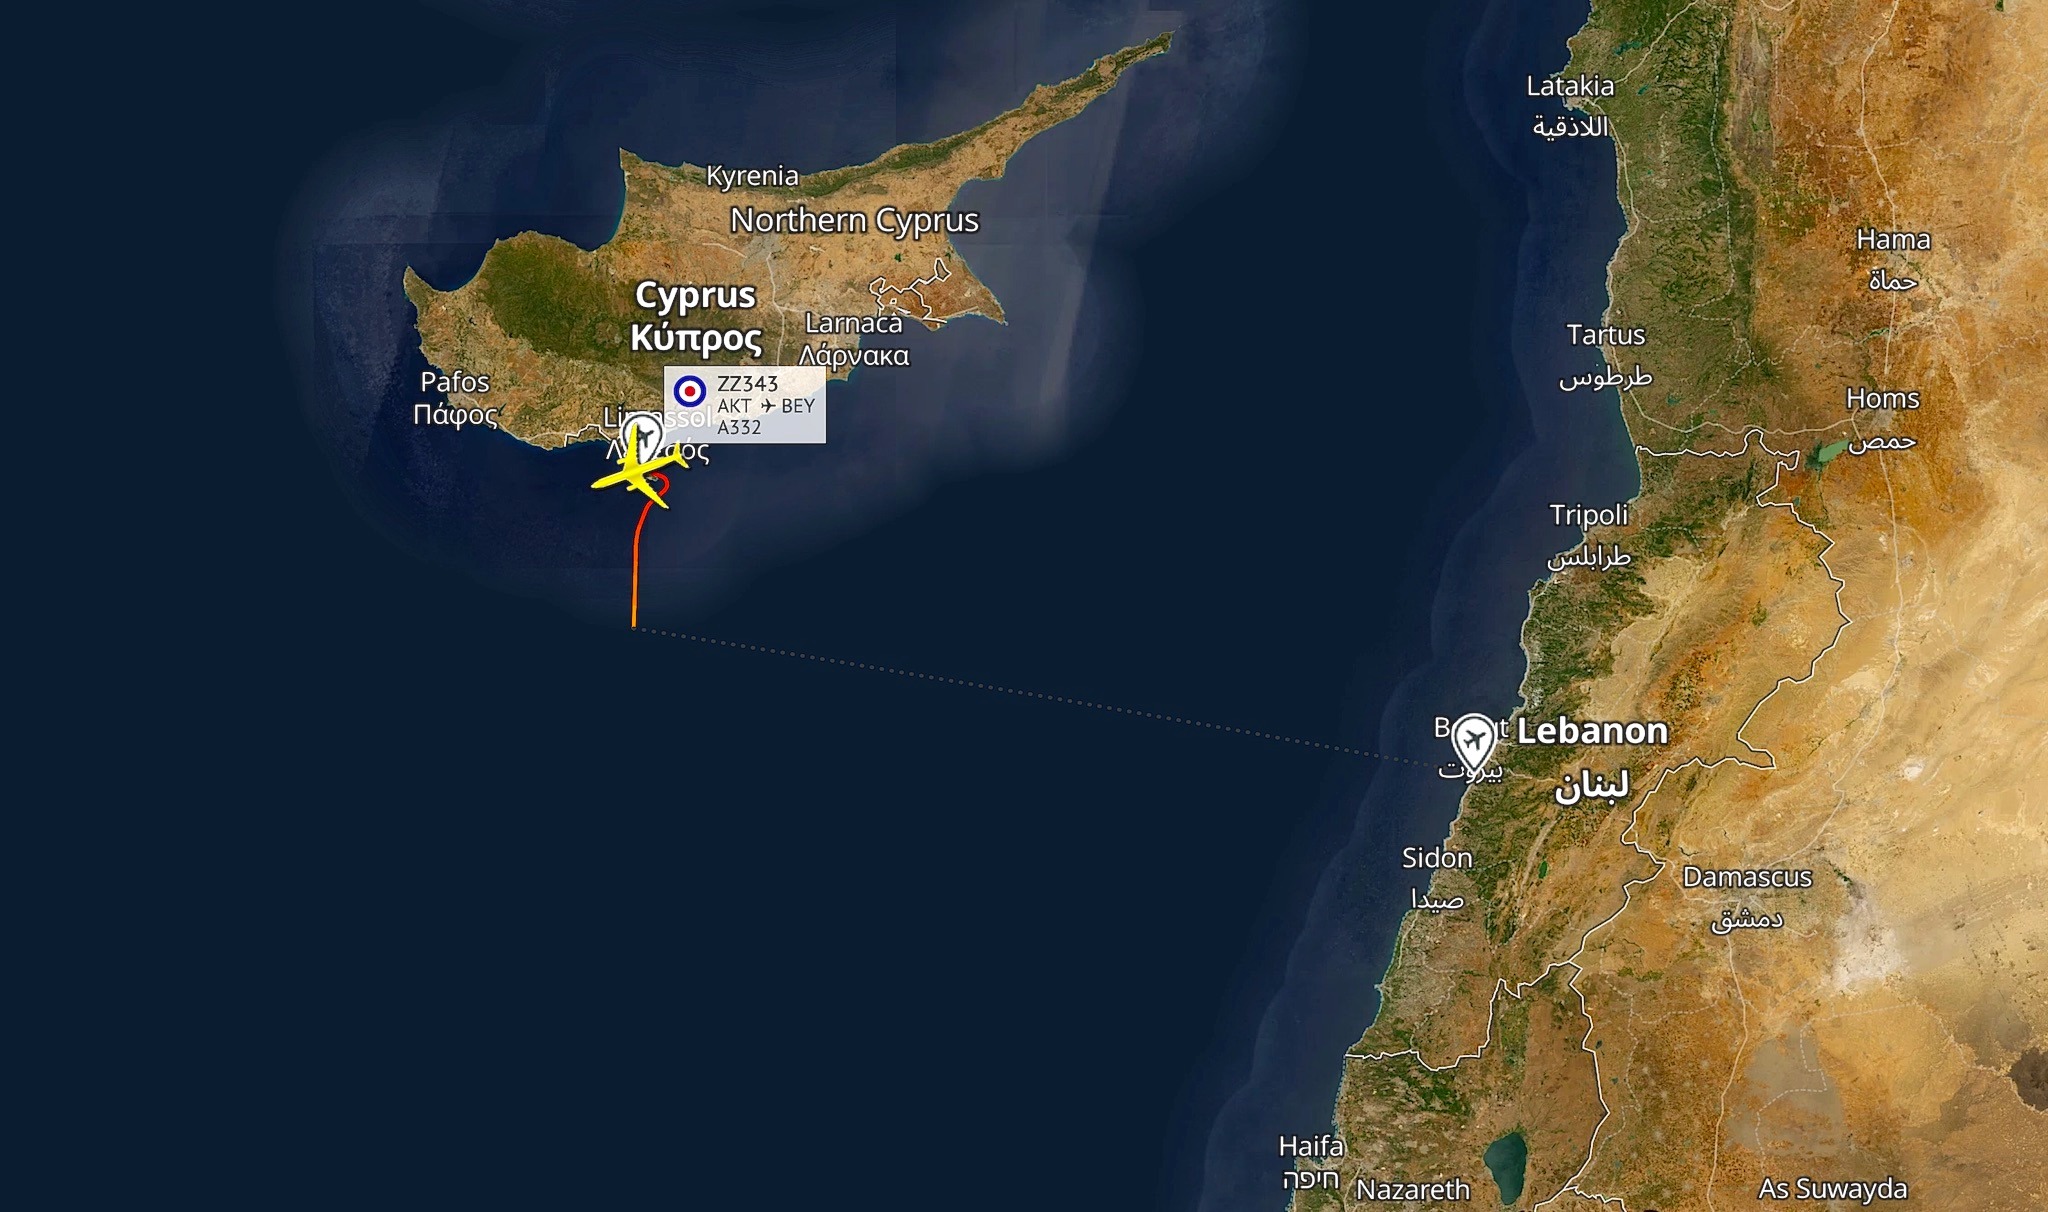 Flight path of a RAF-operated Voyager aircraft which flew from Cyprus to Lebanon on June 11. (Screengrab: RadarBox)